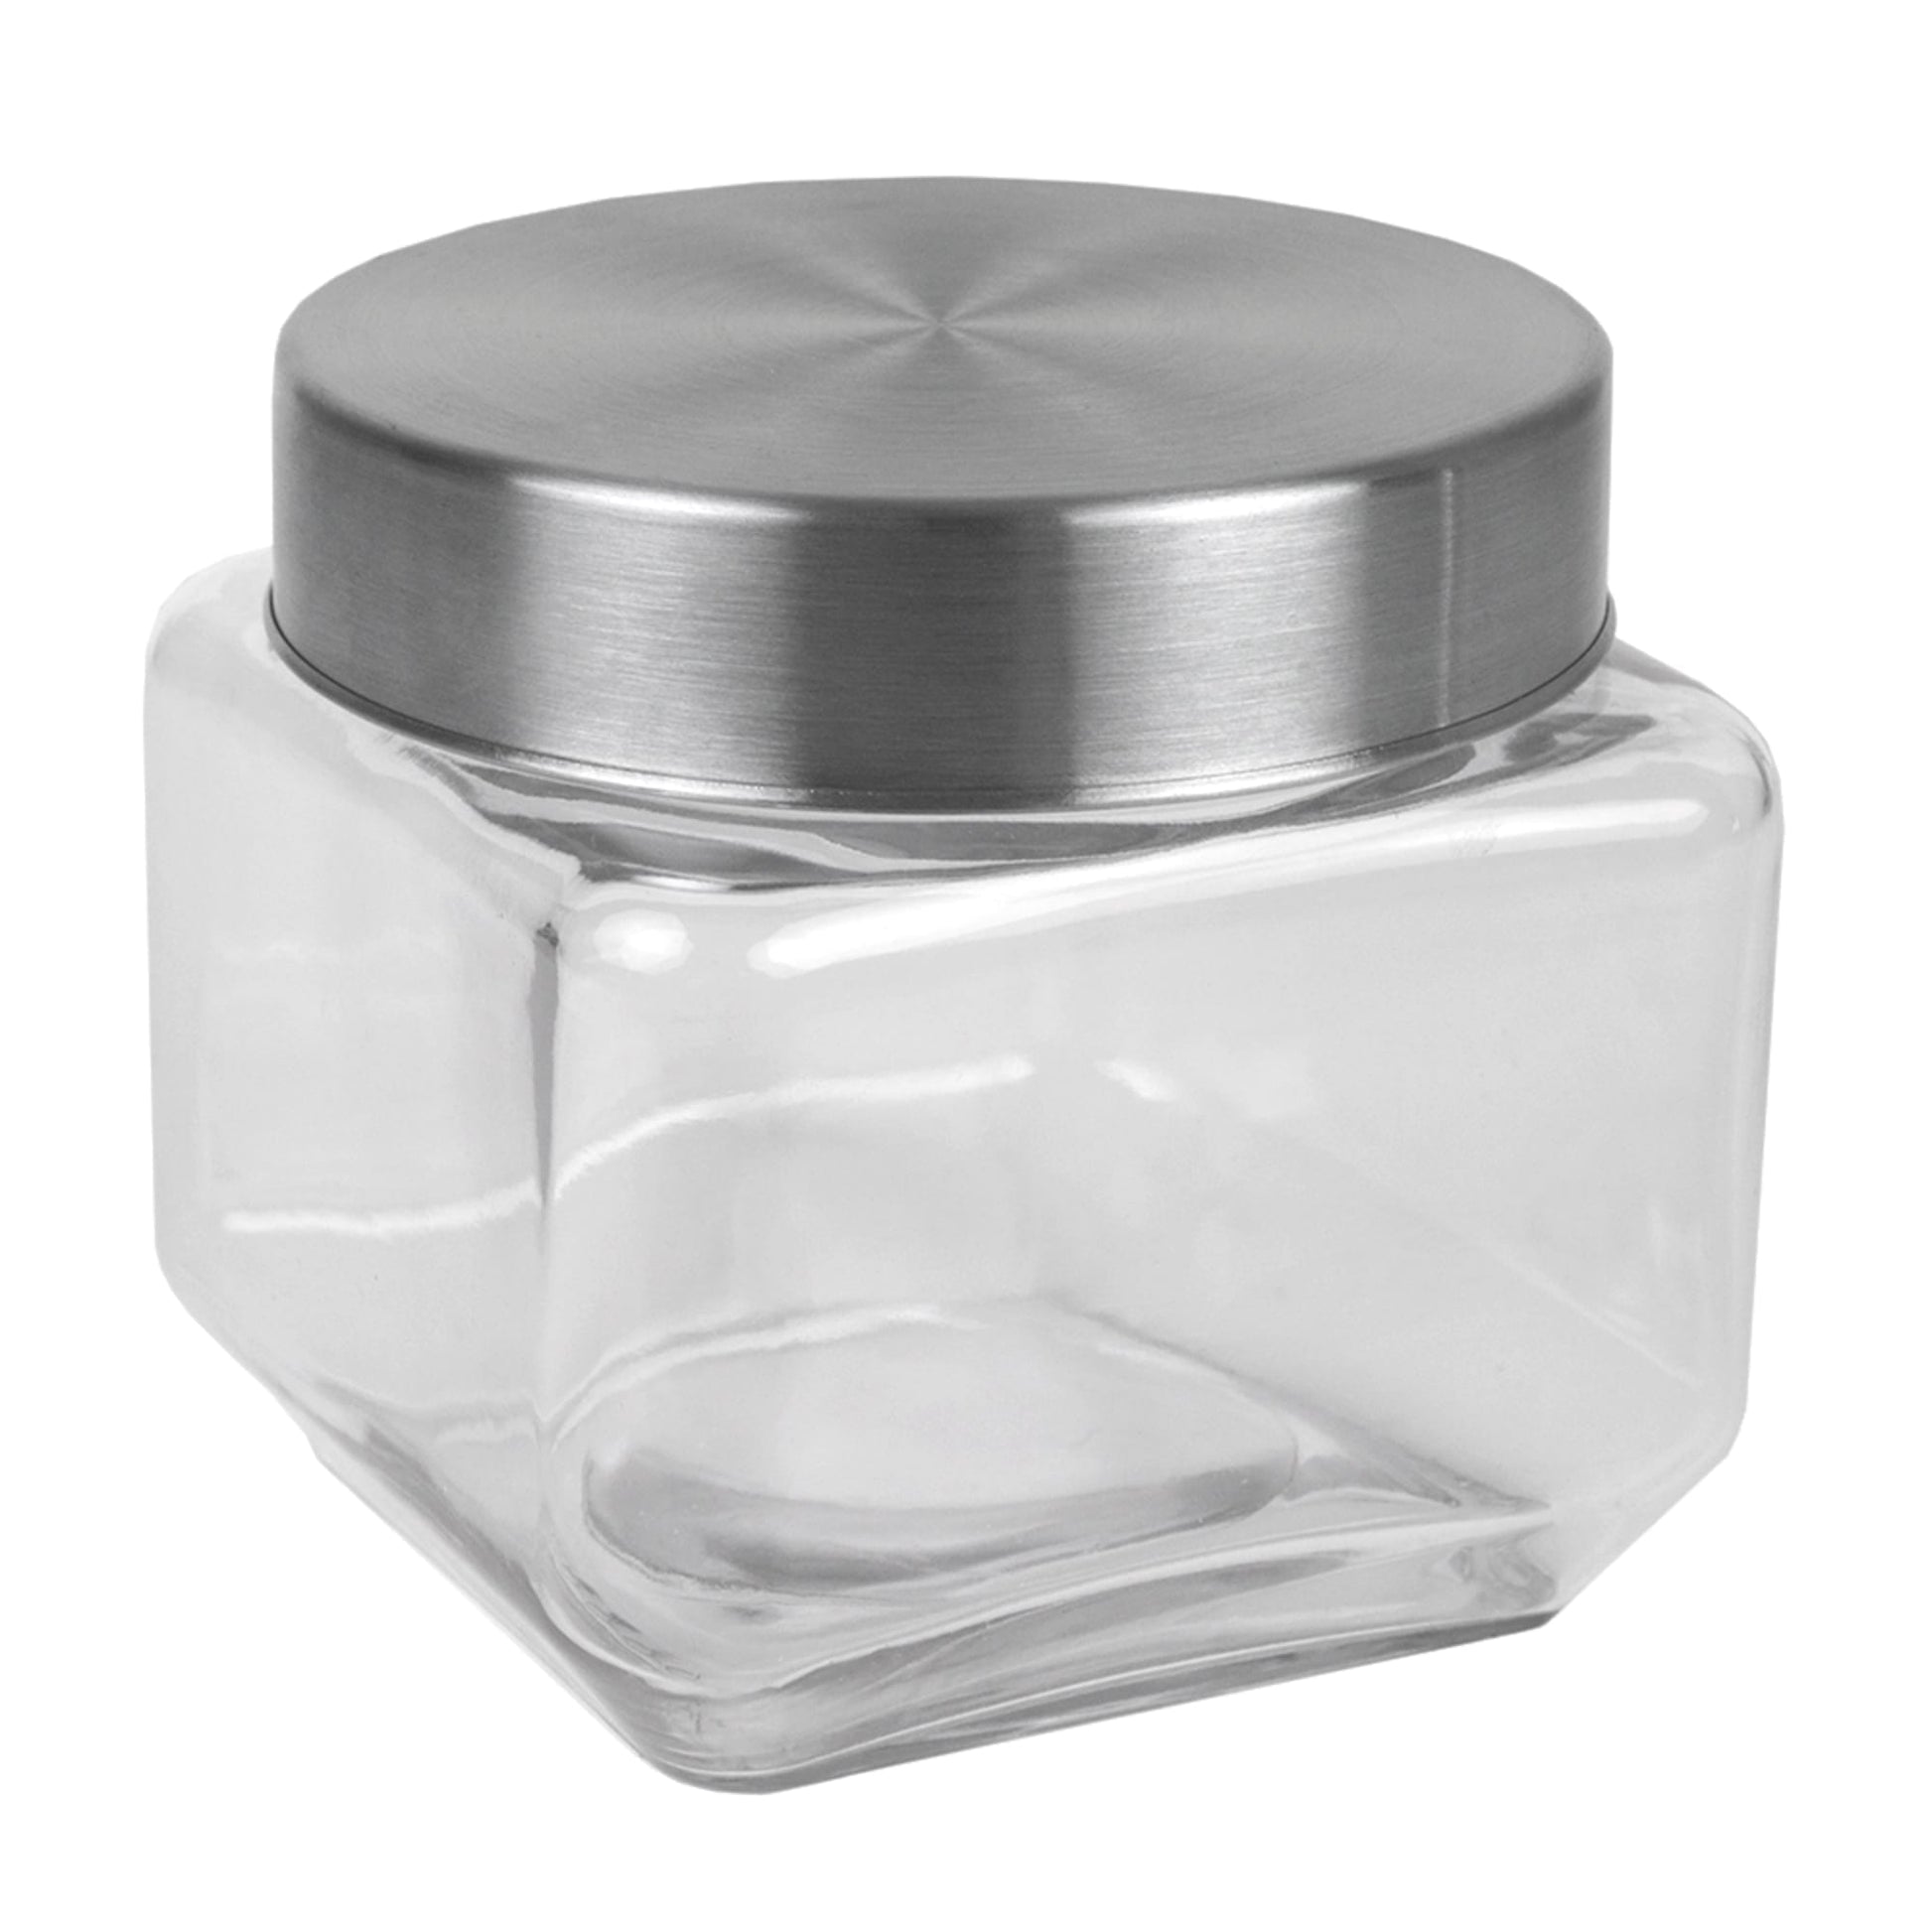 Home Intuition Glass Canister Set with Stainless Steel Lid 4-Piece